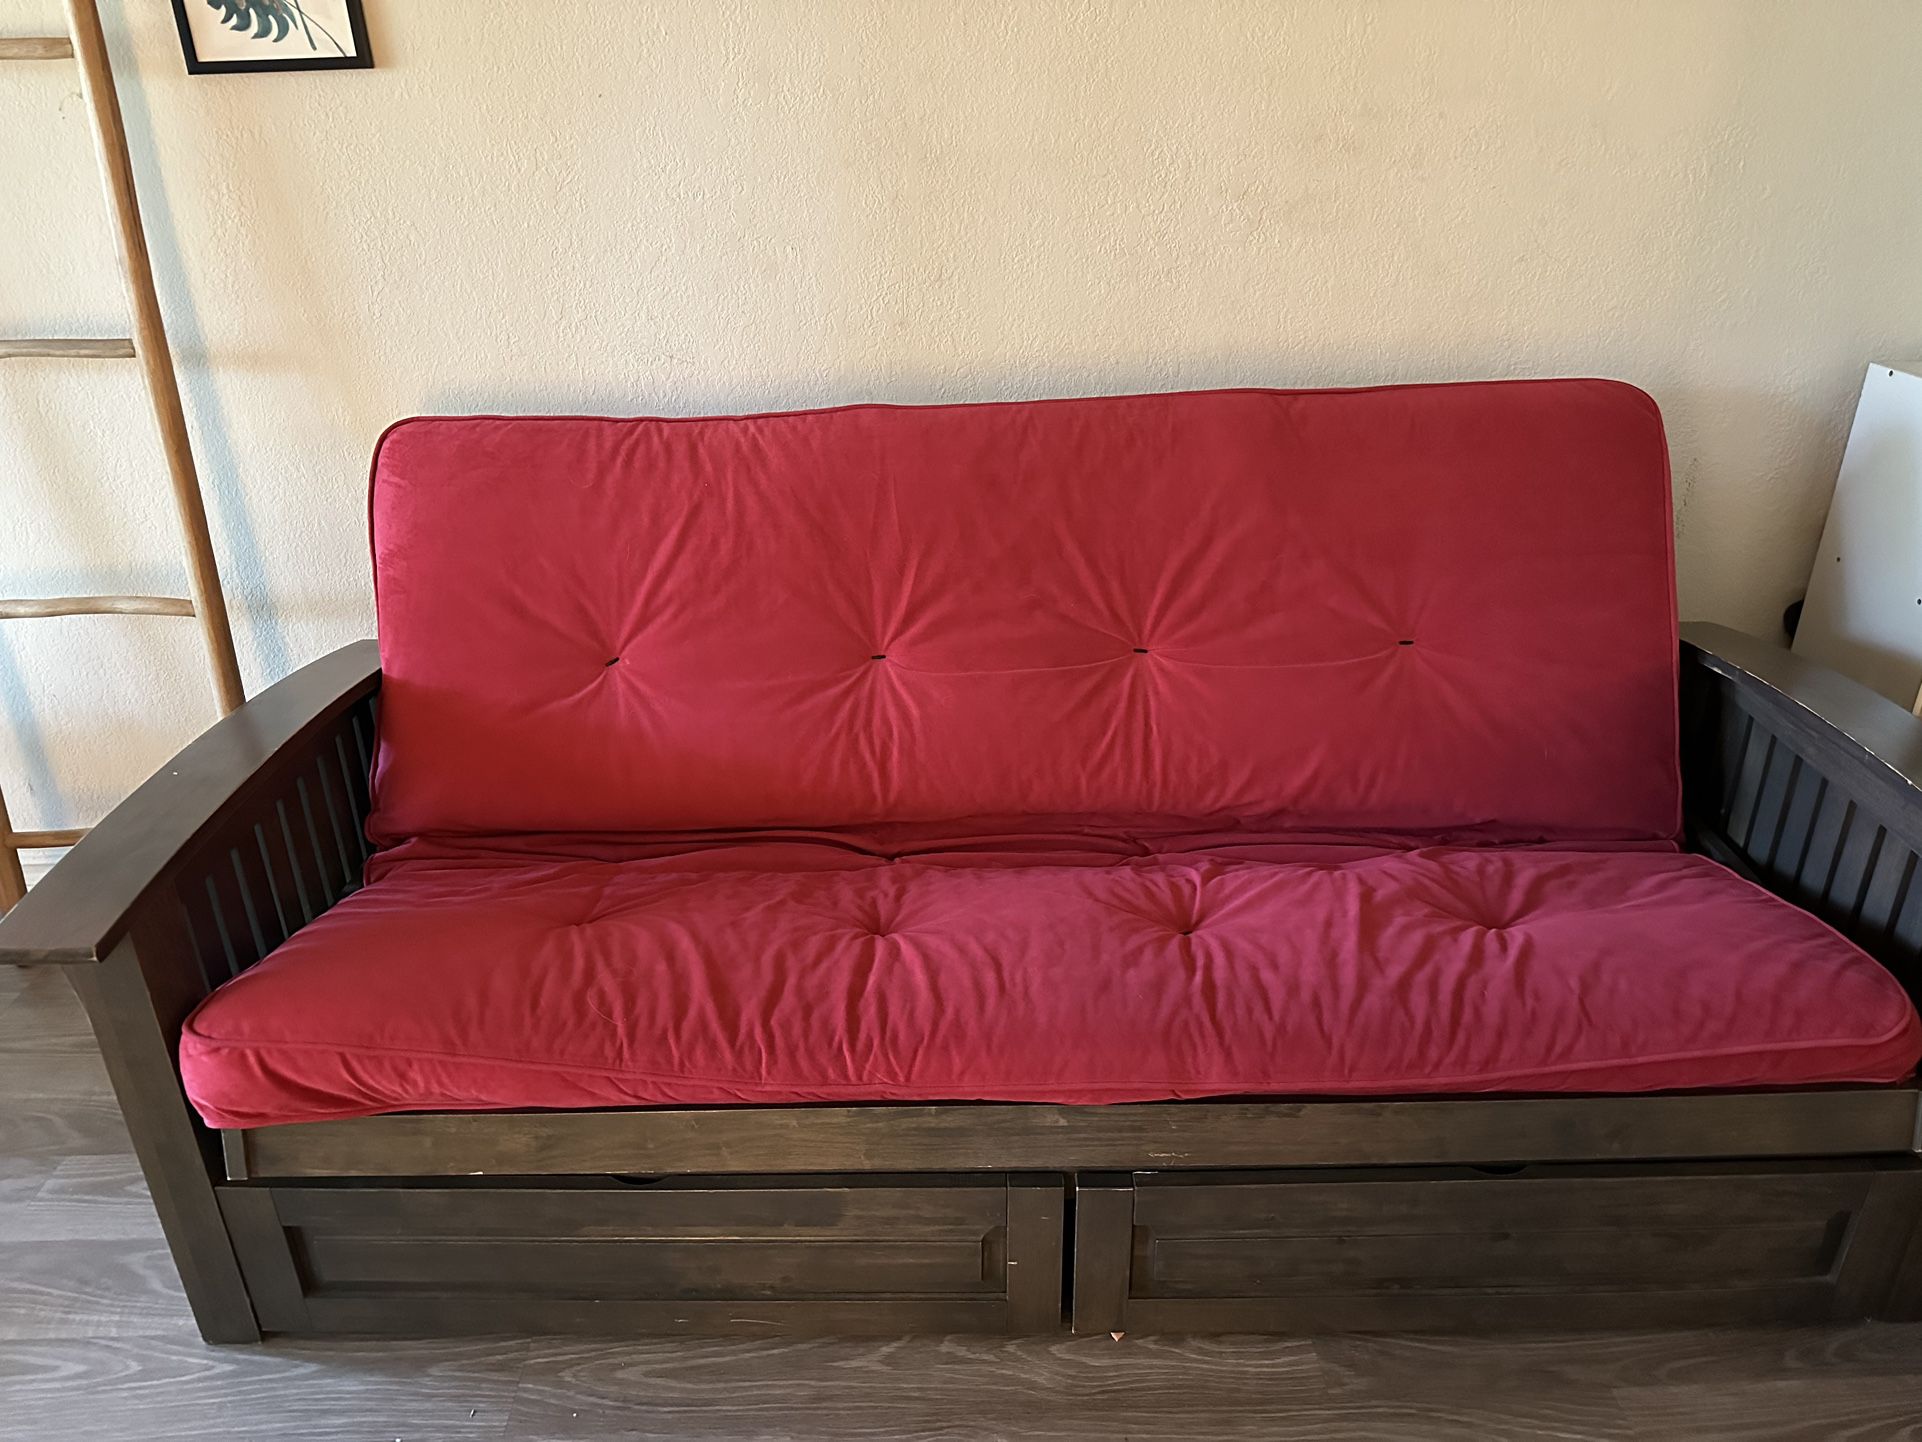 Clinchport Classic Red Futon With Storage 